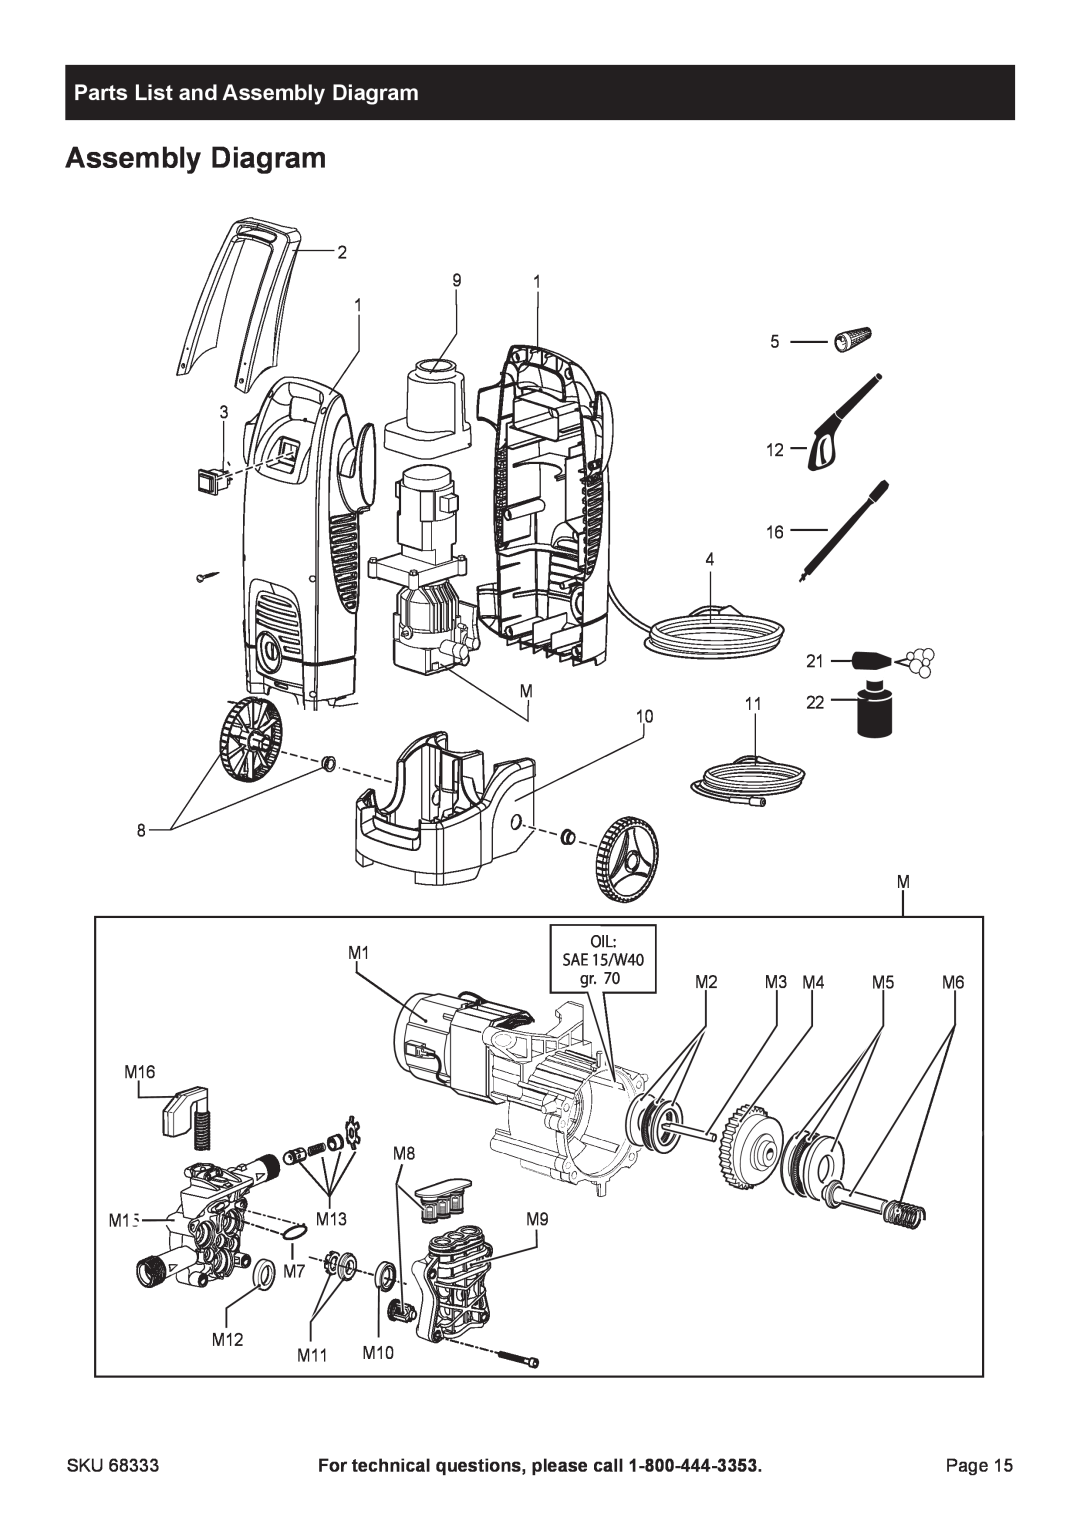 Harbor Freight Tools 68333 manual Parts List and Assembly Diagram, For technical questions, please call 